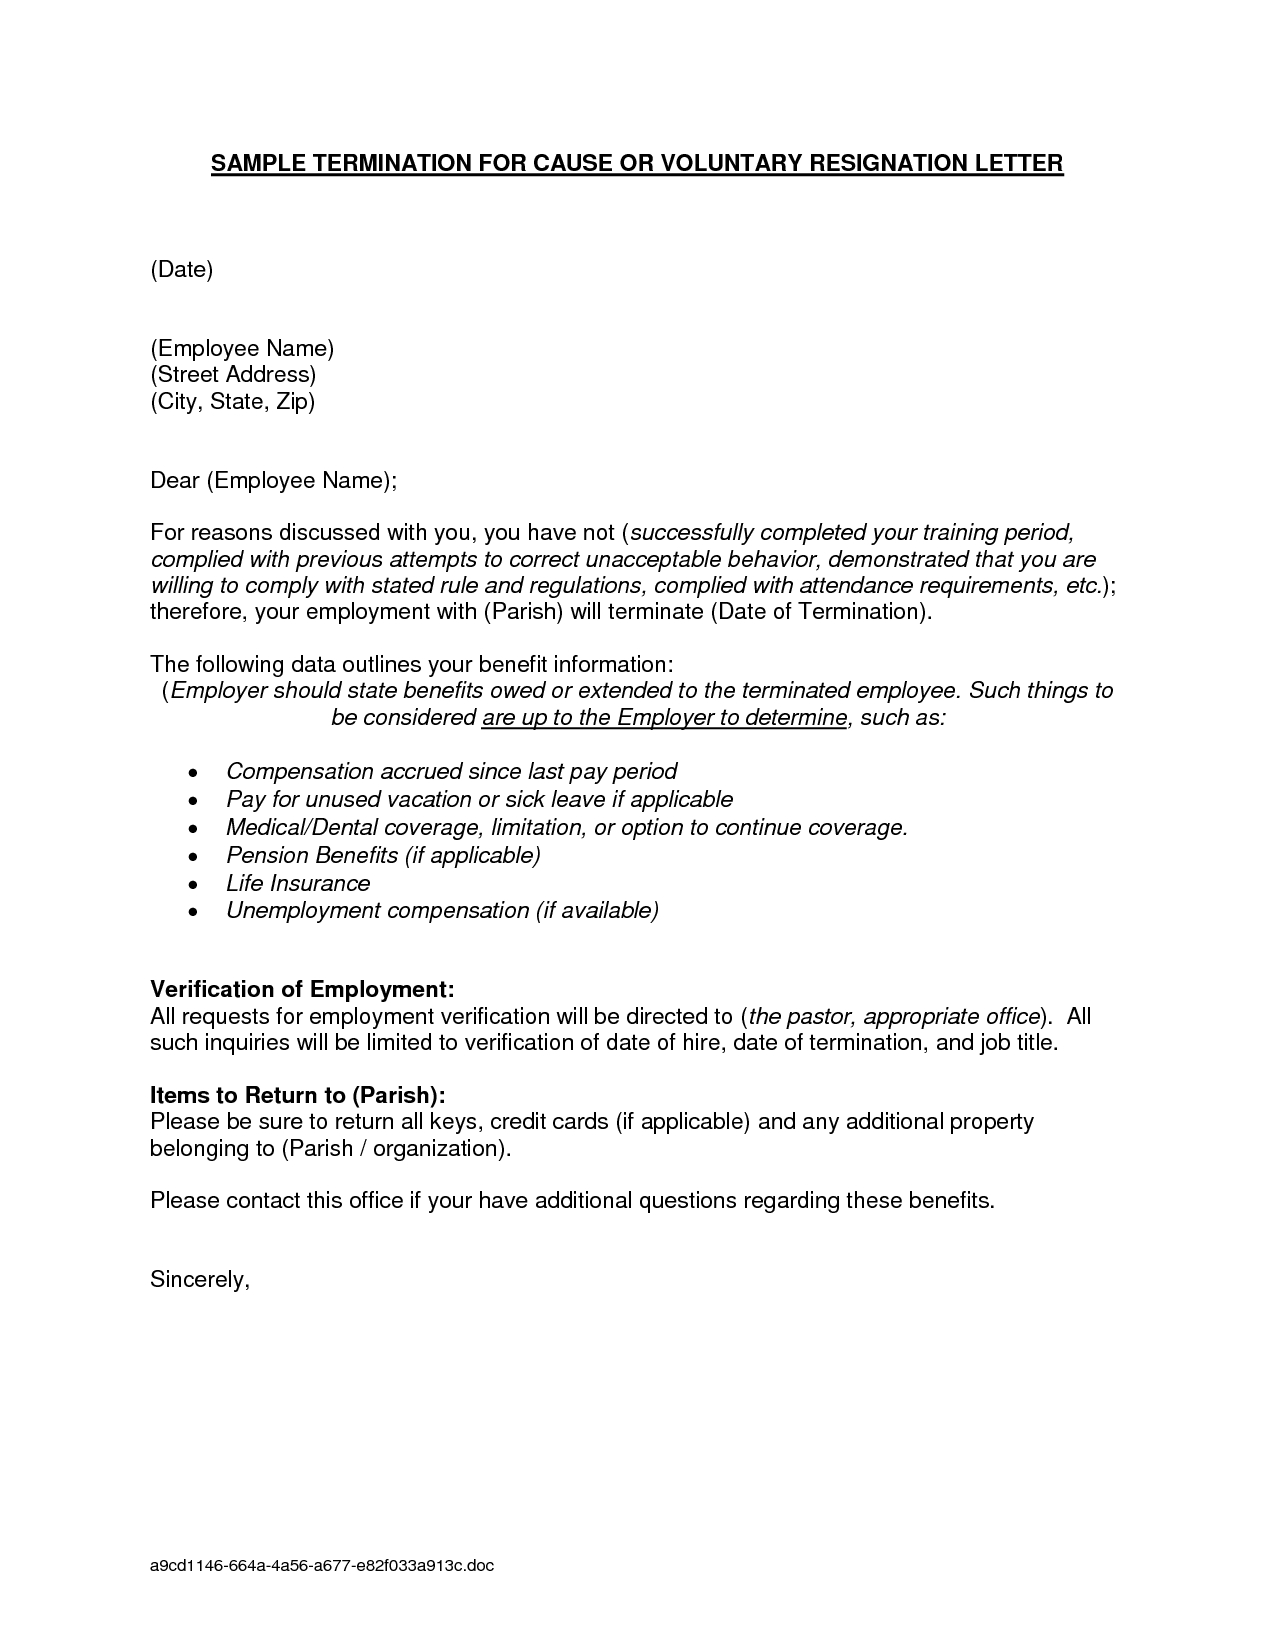 Separation Letter to Employee Template - Medical Resignation Letter Sample Due Illness Example Icover